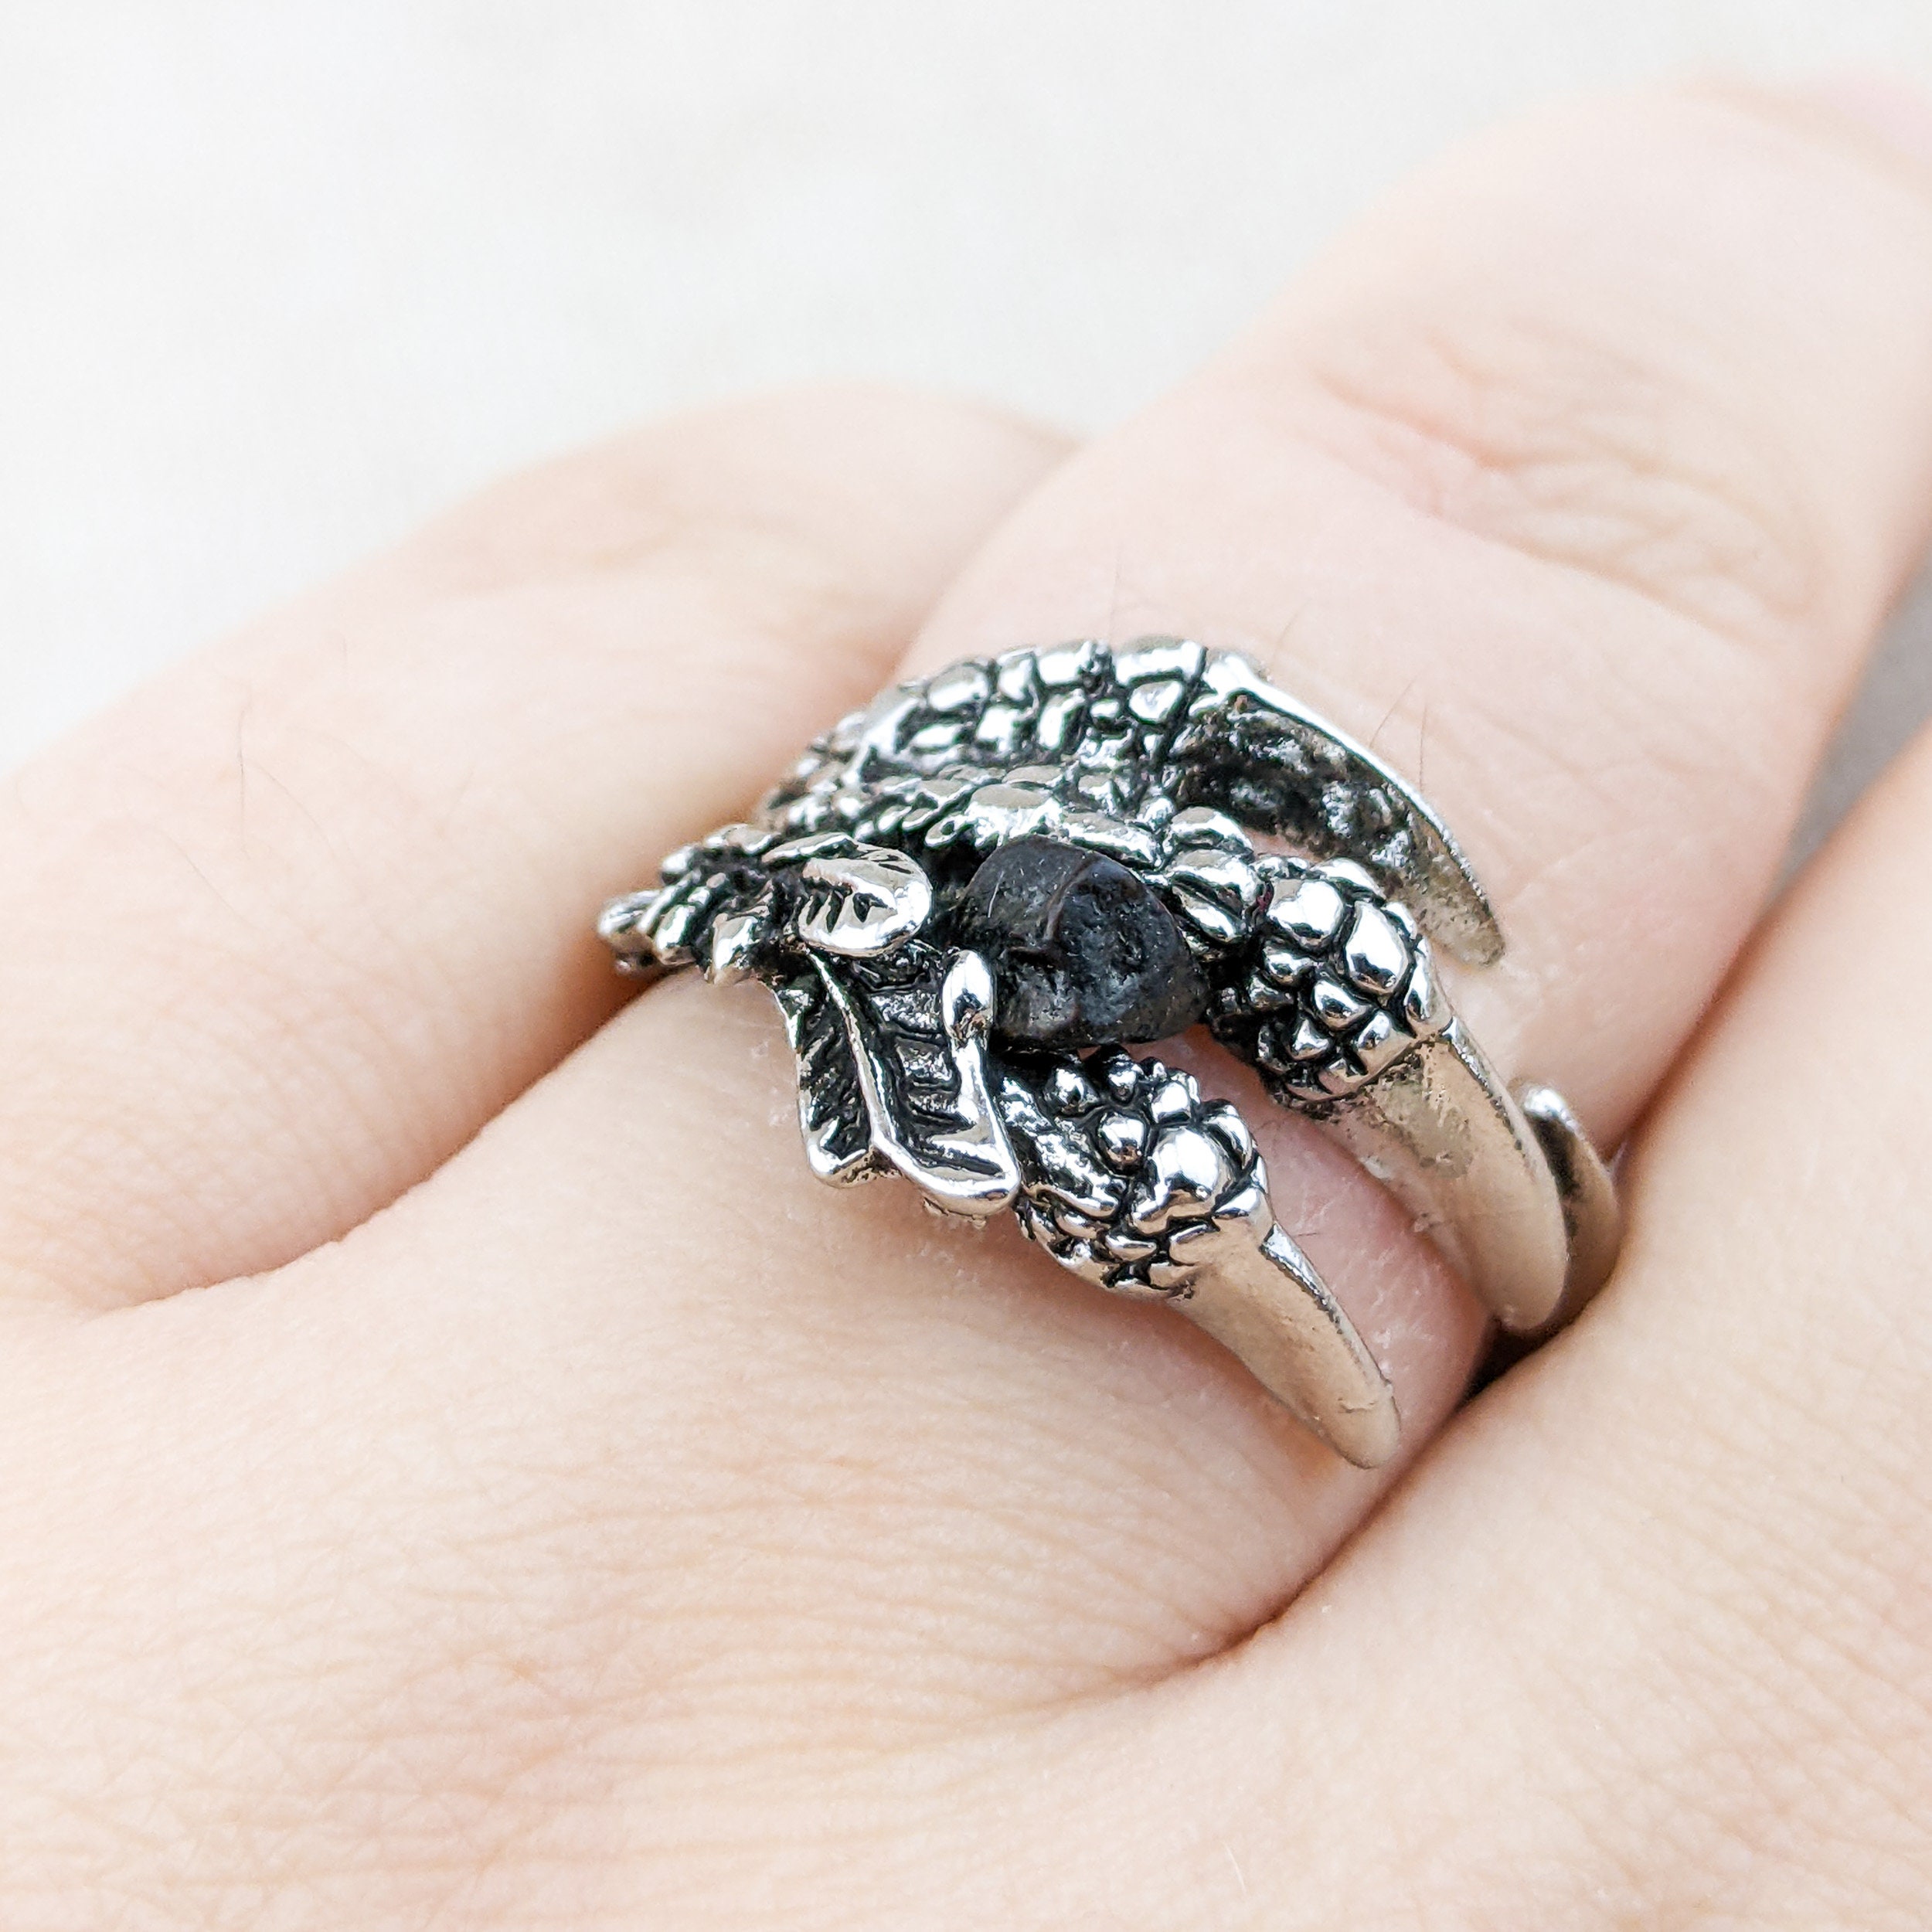 Emperor's Talon - Dragon Claw Ring Big Silver Gothic Stainless Steel –  Wicked Tender